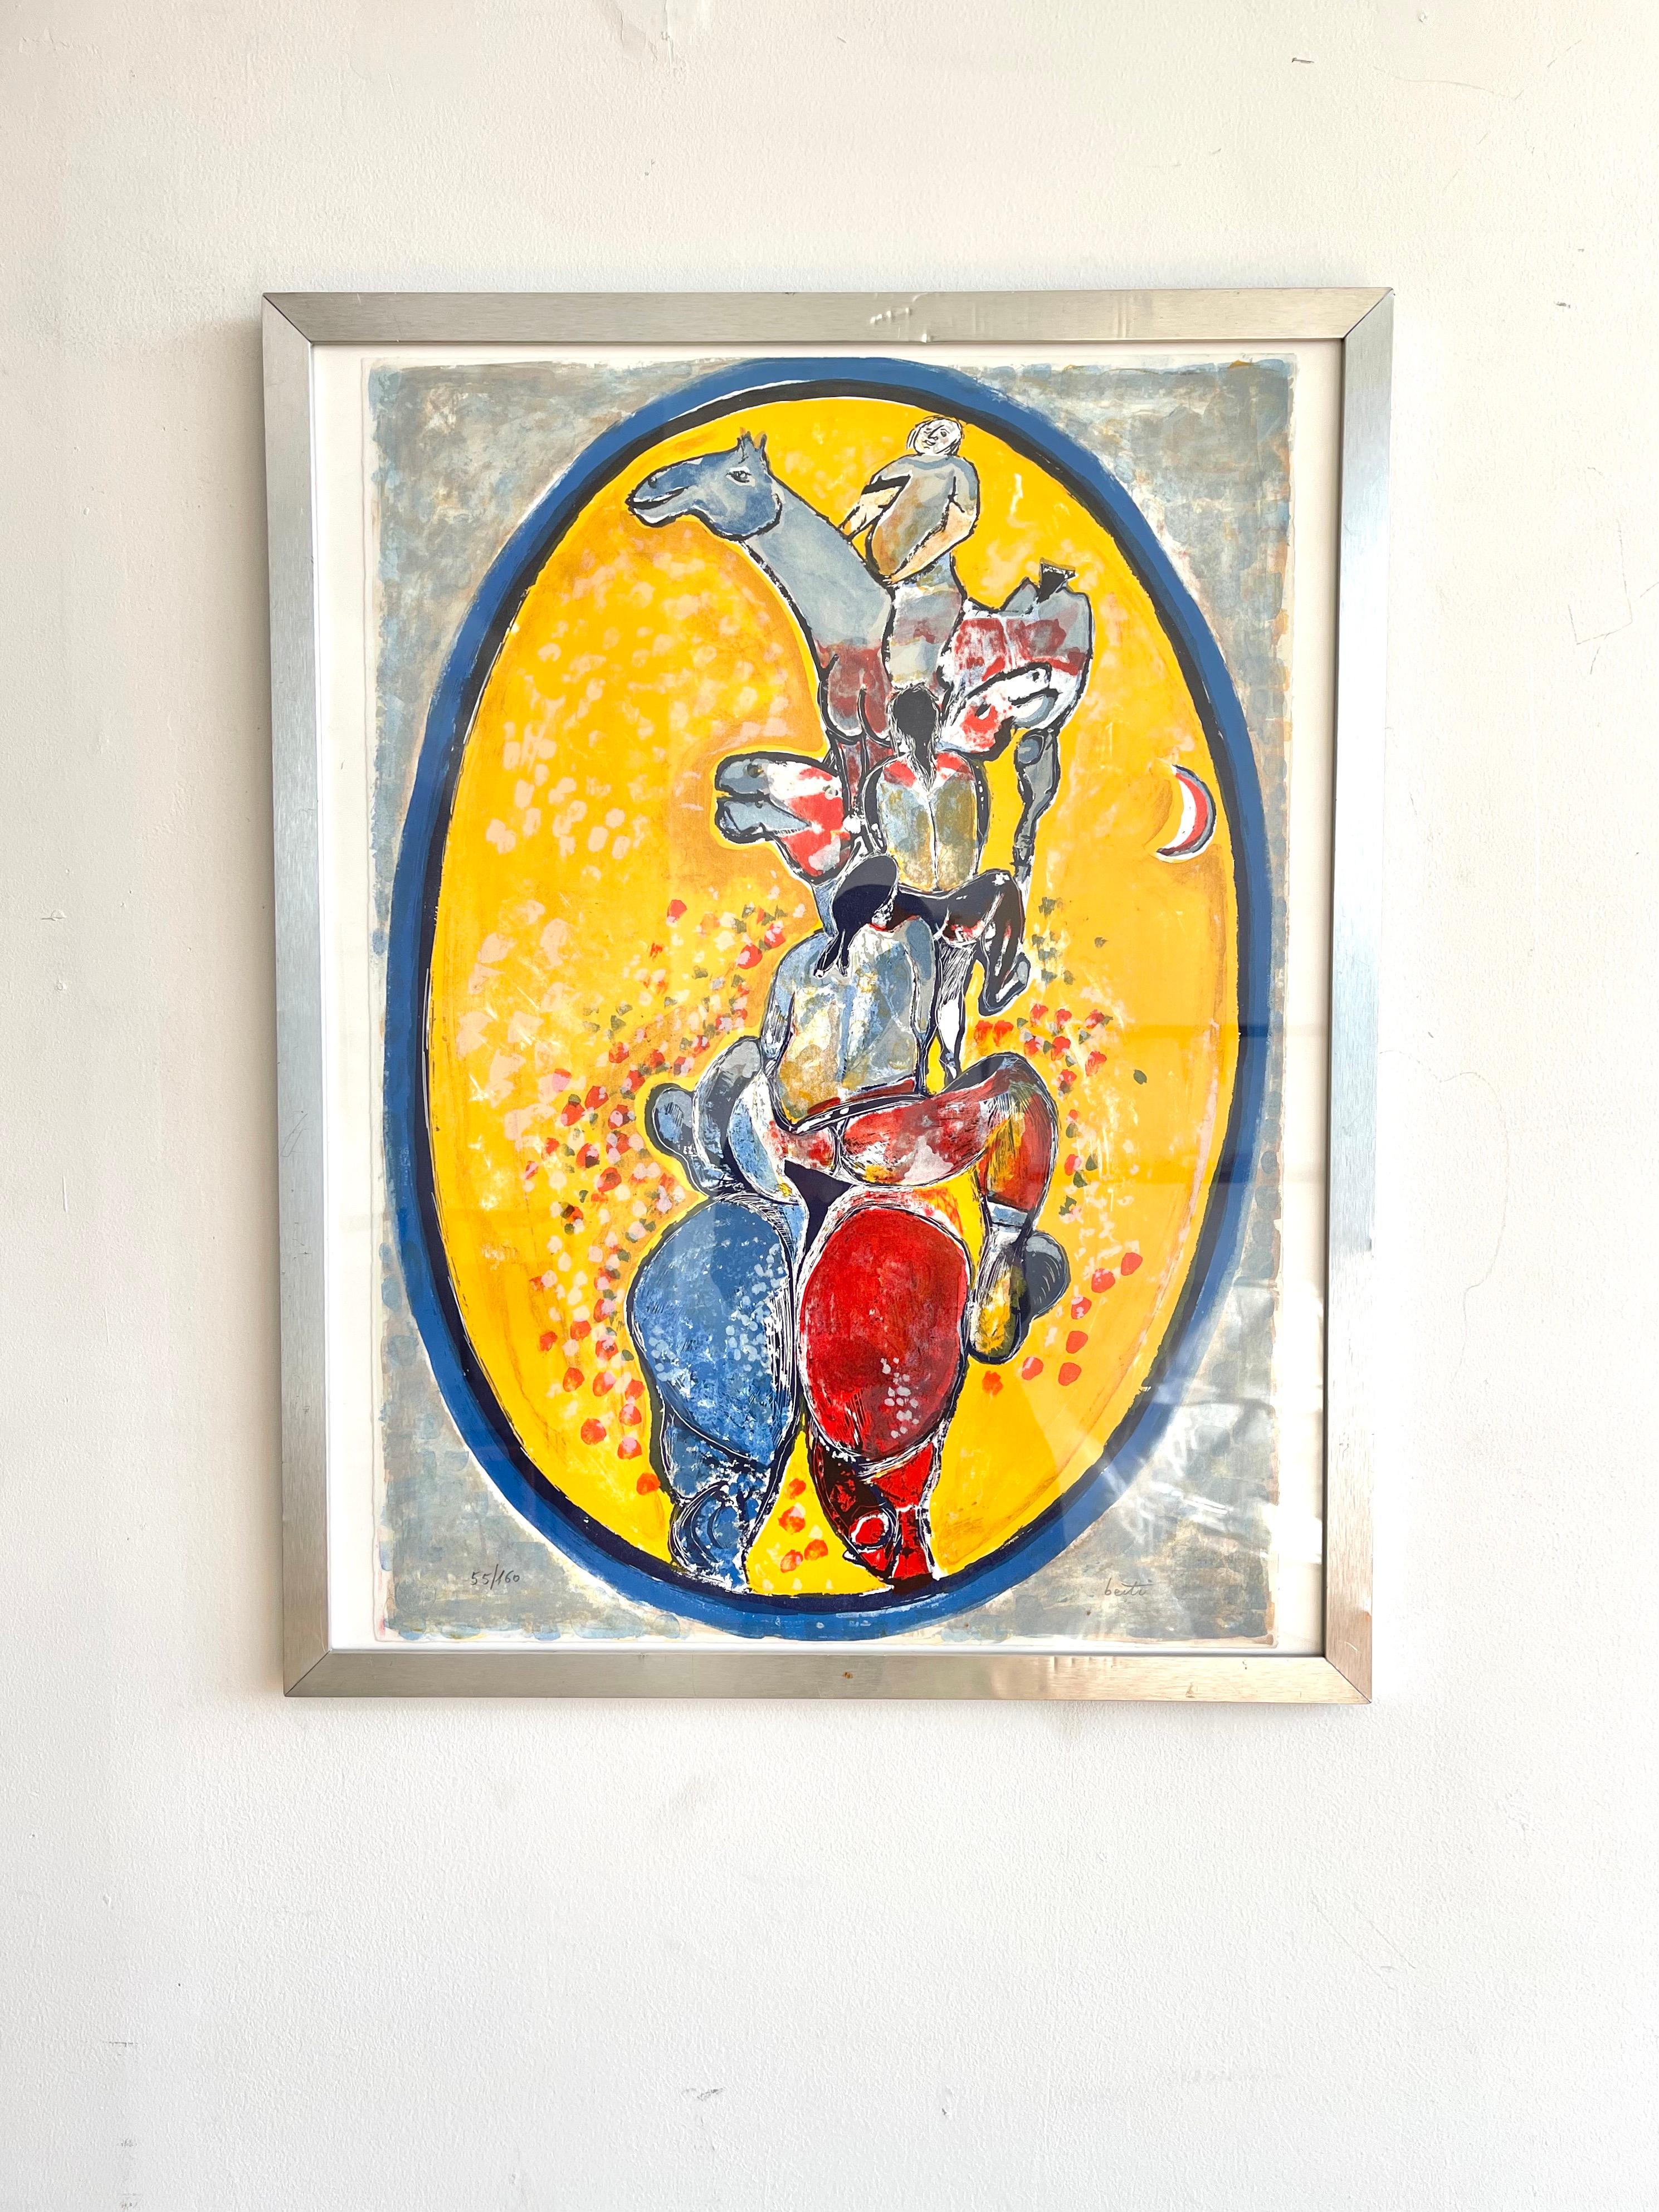 Indulge in the timeless allure of Italian painter Alberto Berti with this stunning Vintage Lithograph from the 1960s. Encased in a sleek rectangular aluminum frame, this limited edition piece titled 'Cavalli e Cavalieri' (Horses and Knights) is a